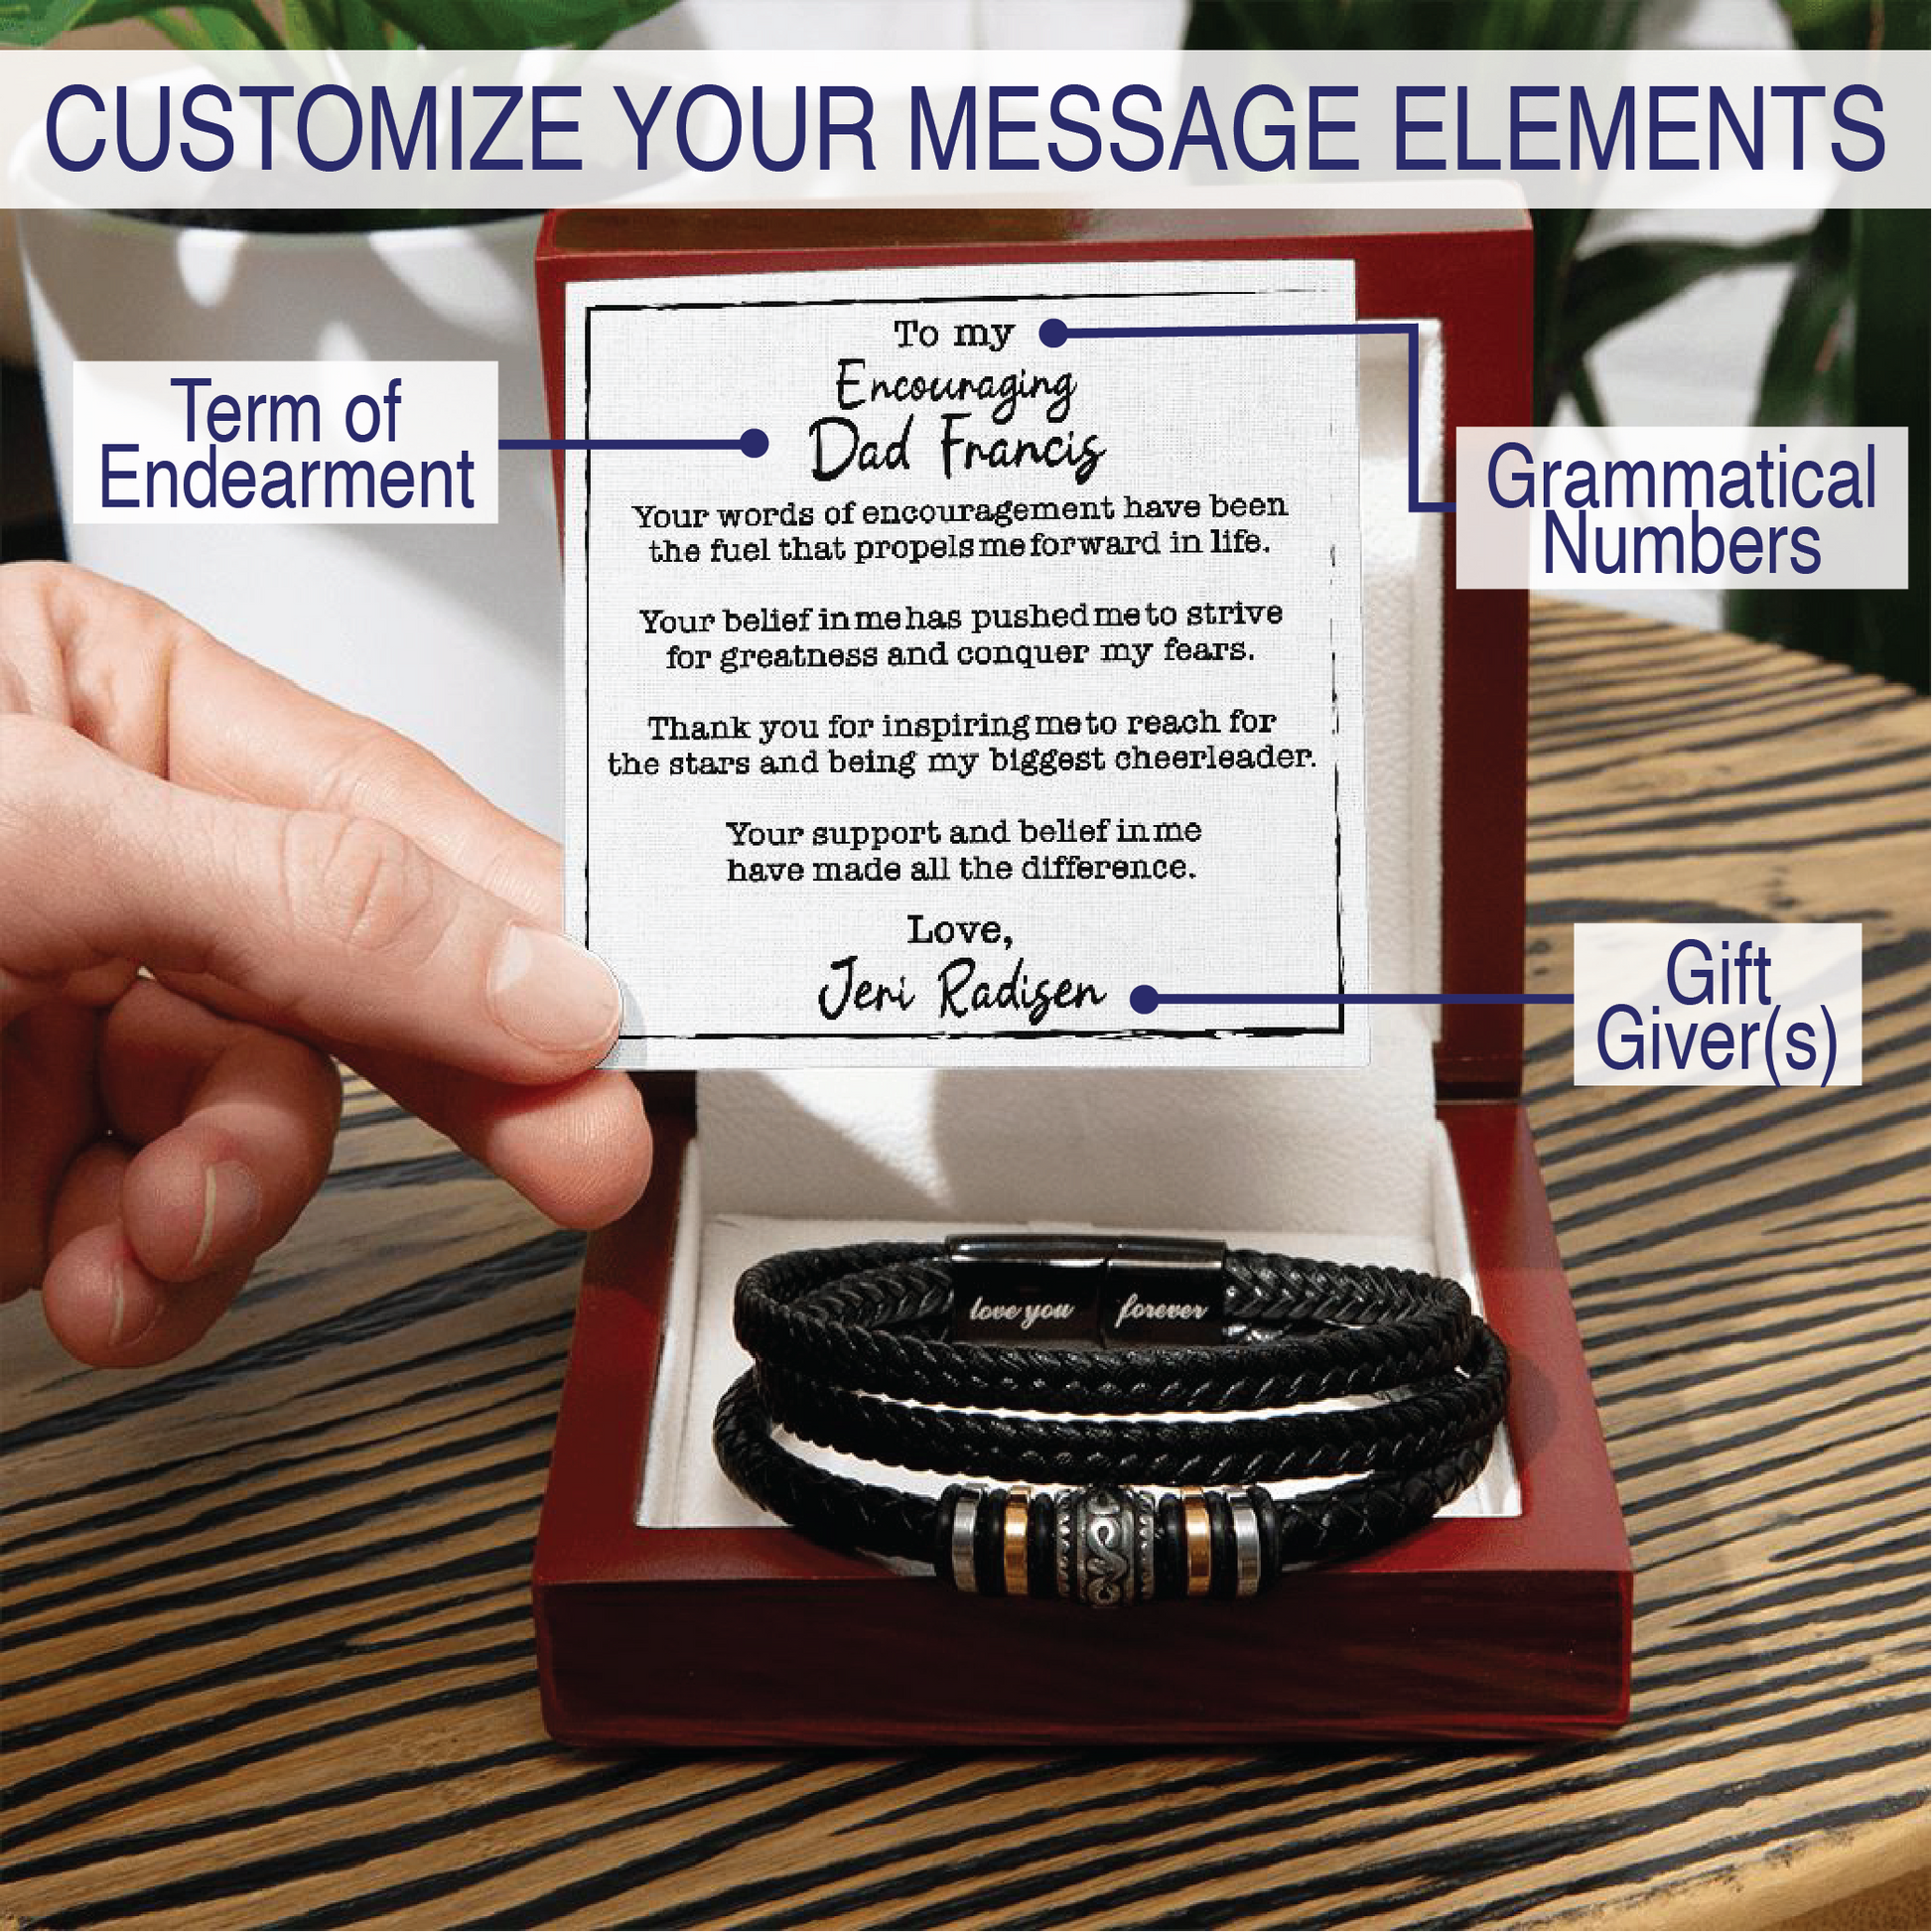 Customizable Names and Message Elements - Men's Love You Forever Bracelet With Wooden Box With LED And Message Card For Encouraging Dad - Elegant Endearments